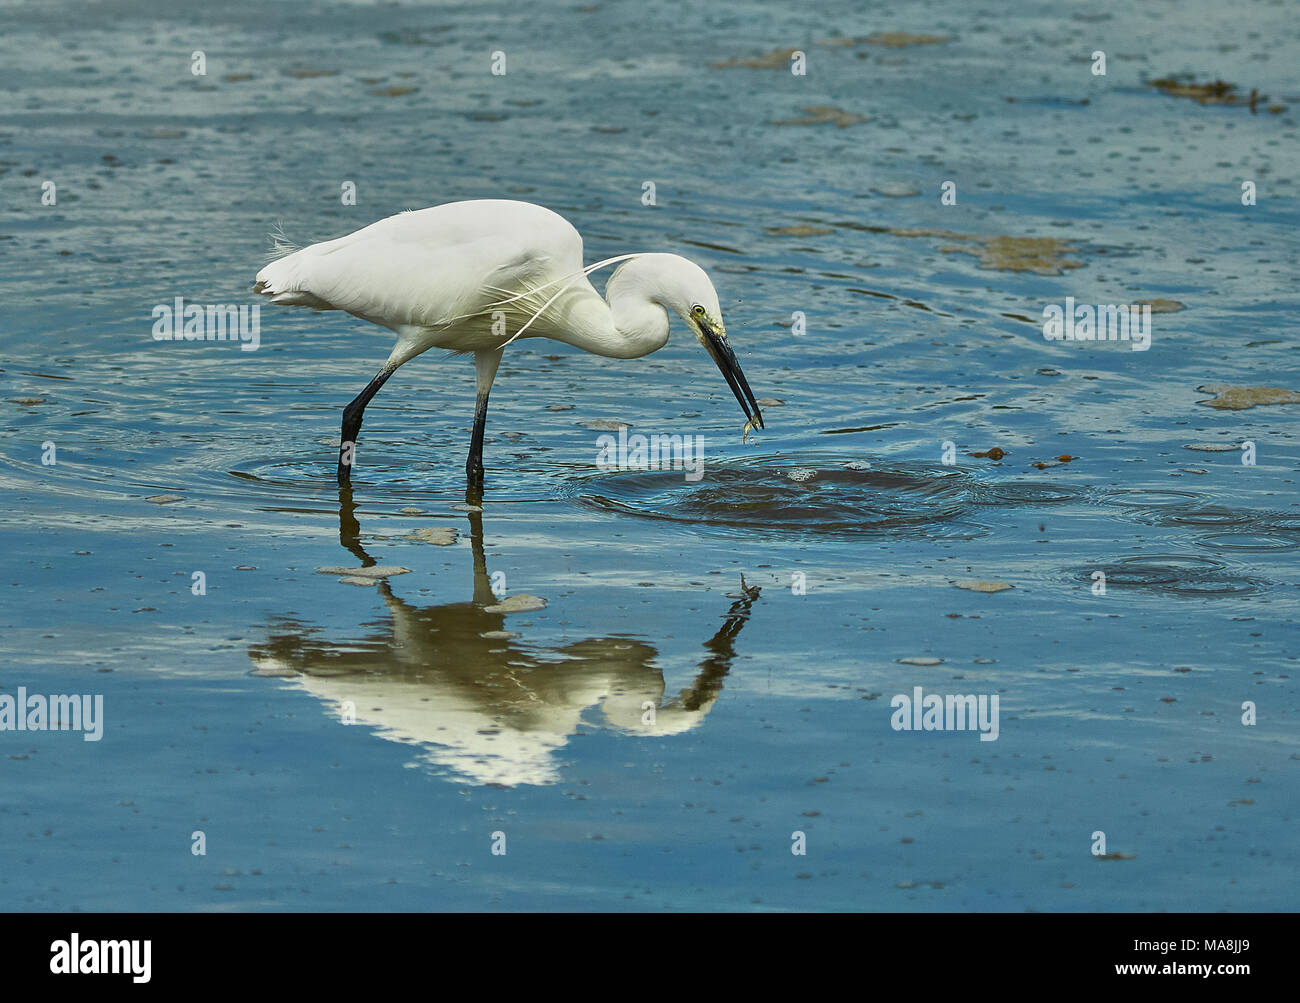 A Little Egret (Egretta Garzetta) with a small fish in its beak just after being caught from the water, England, UK Stock Photo